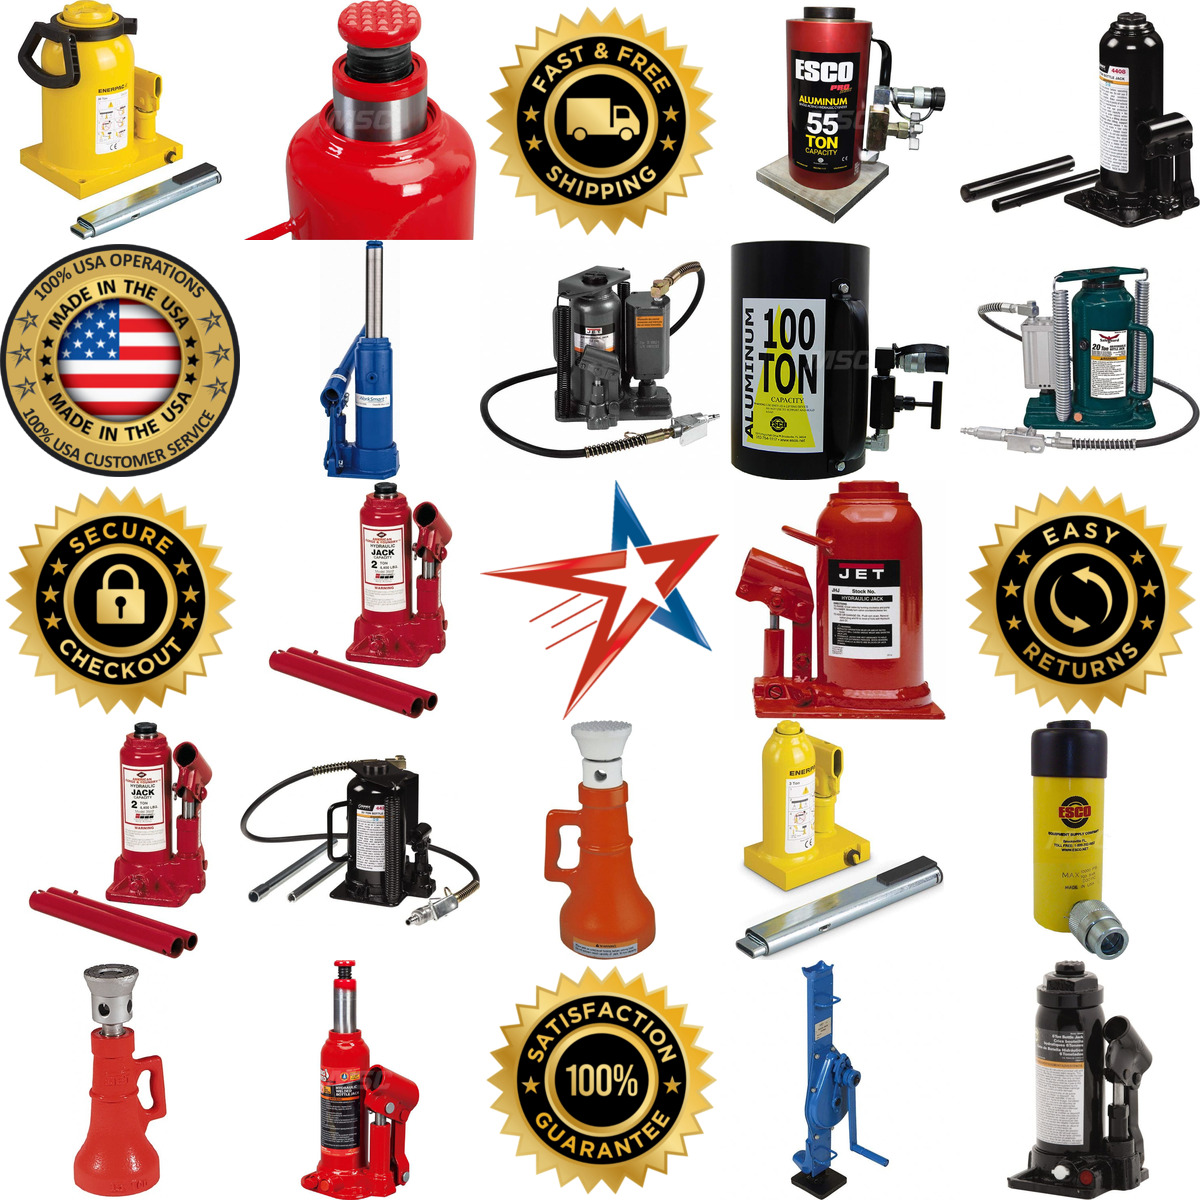 A selection of Manual Bottle Screw Ratchet and Hydraulic Jacks products on GoVets